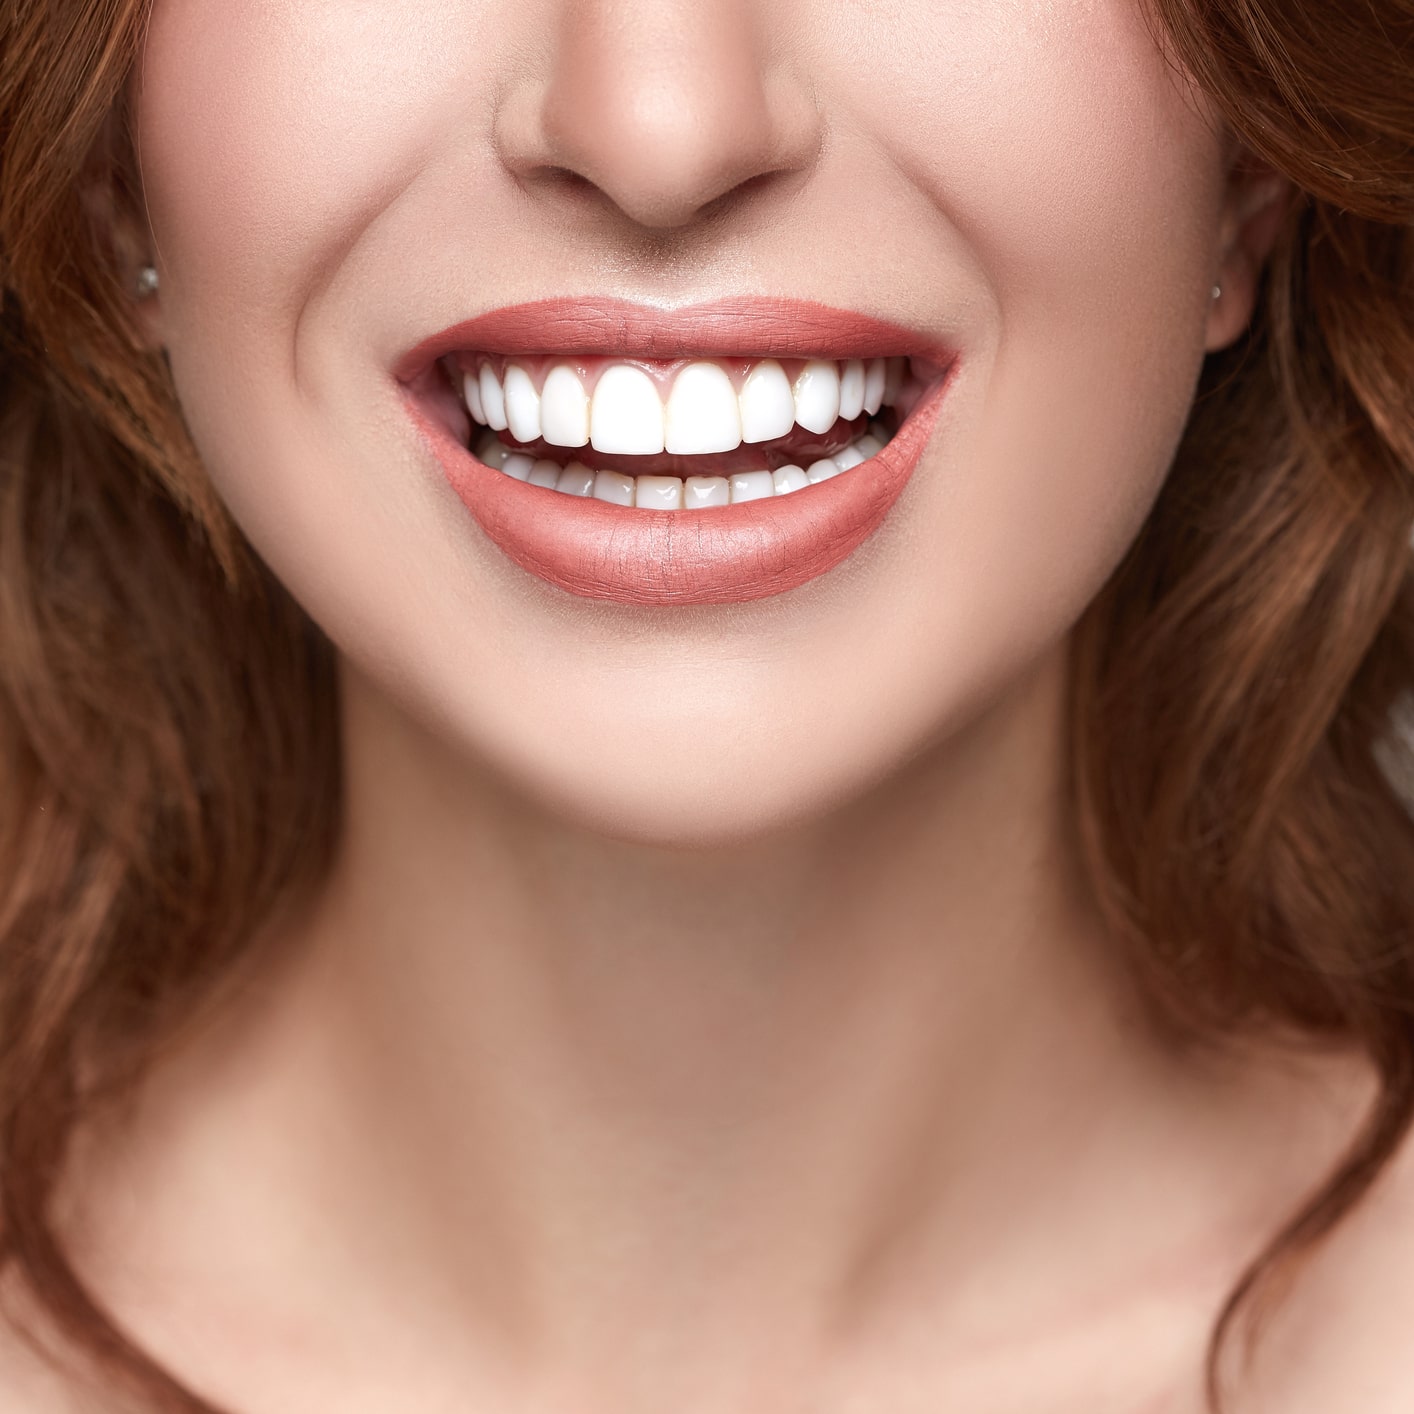 Beautiful smile with bright white teeth and red hair